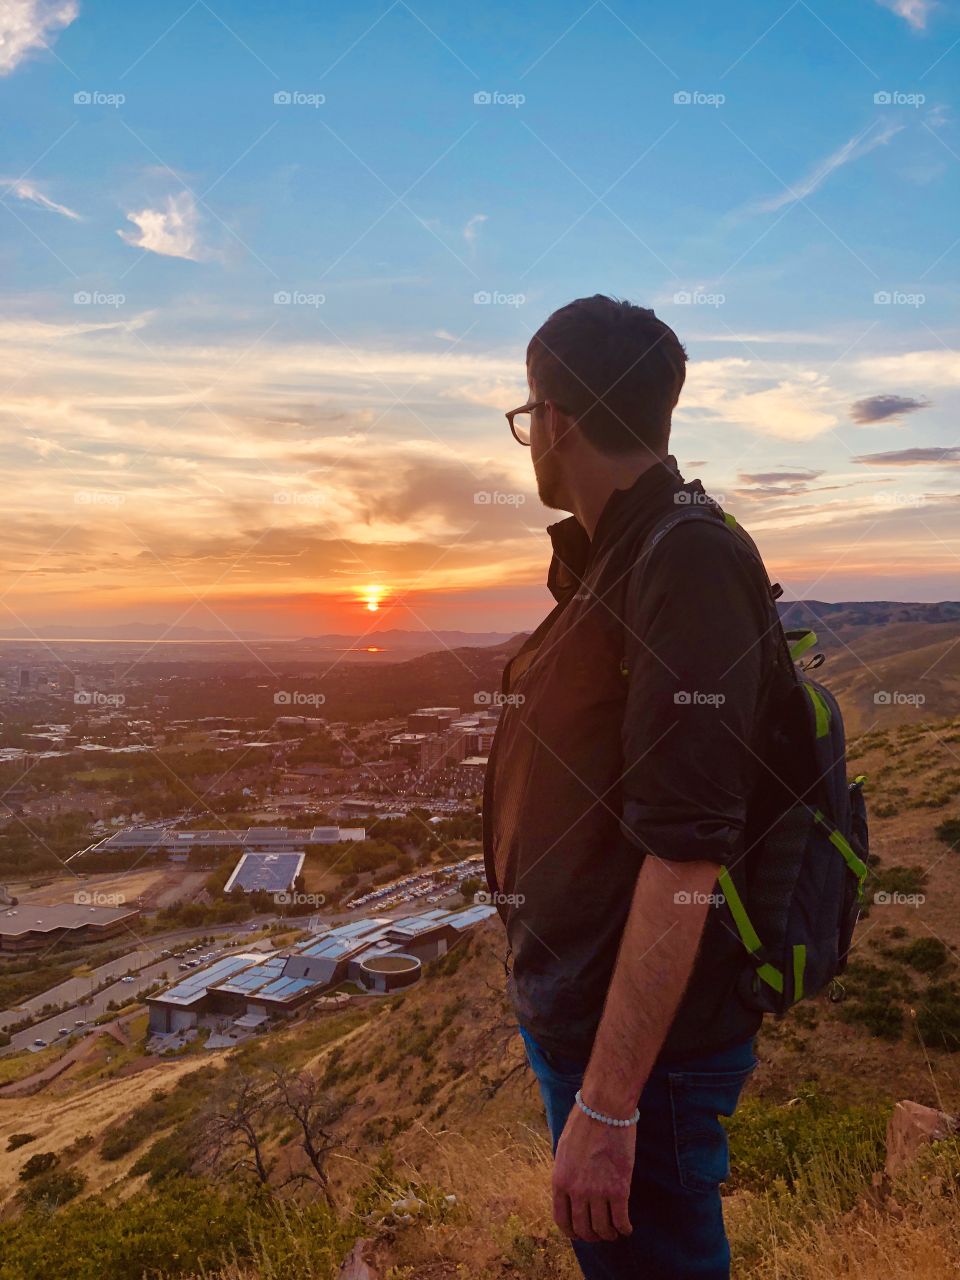 Man staring at the beautiful, orange sunset from a mountain top. The sky is colorful and calming.